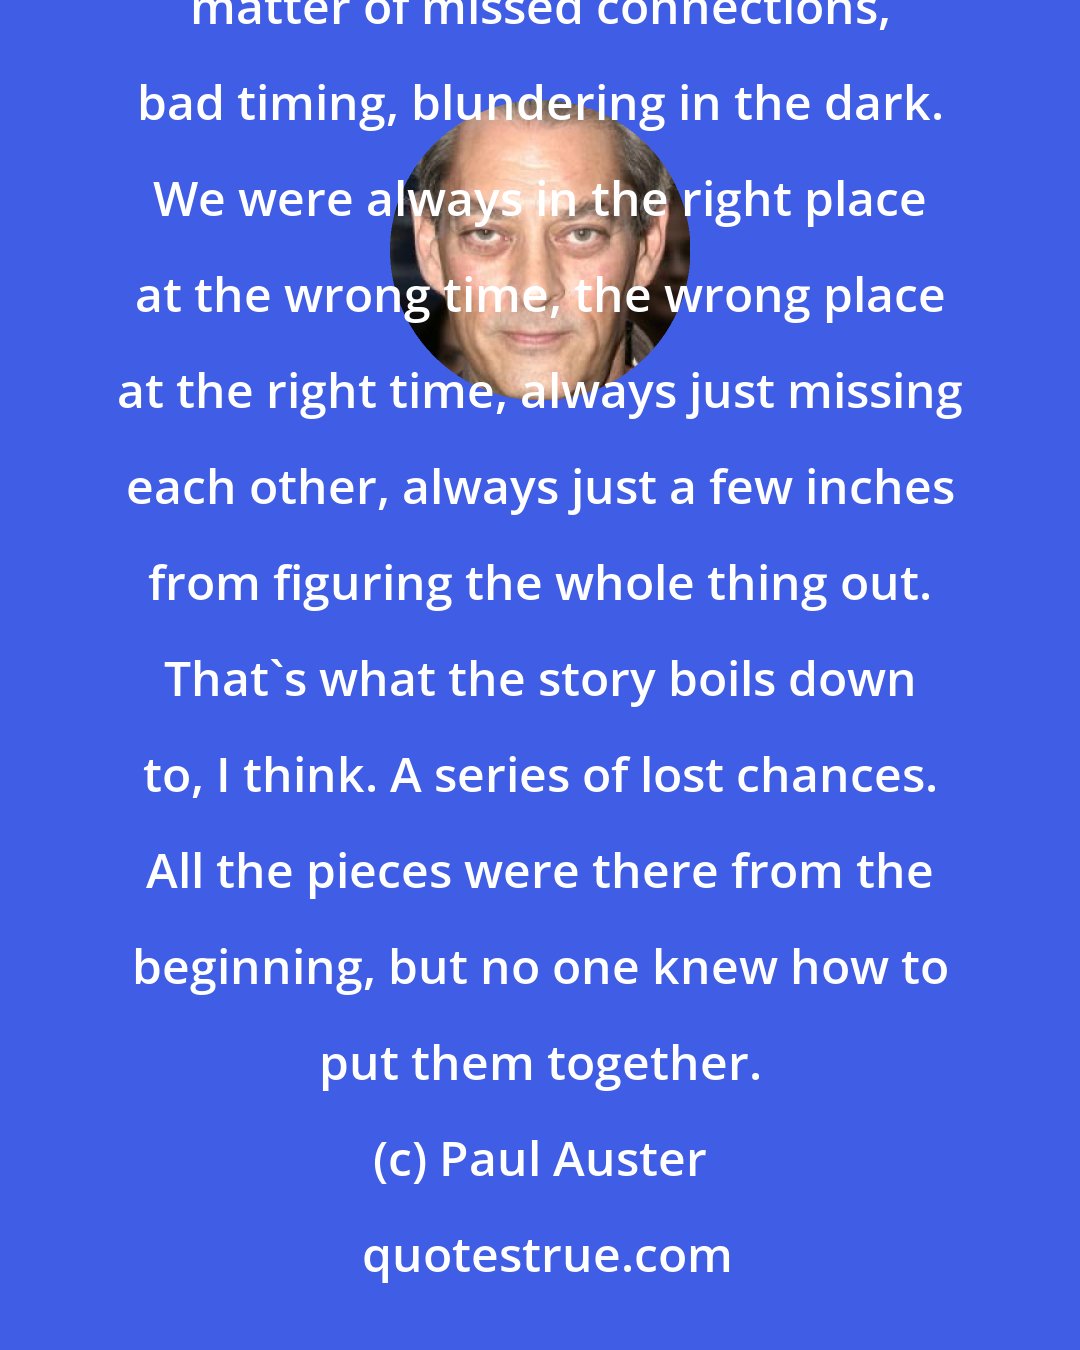 Paul Auster: No one was to blame for what happened, but that does not make it any less difficult to accept. It was all a matter of missed connections, bad timing, blundering in the dark. We were always in the right place at the wrong time, the wrong place at the right time, always just missing each other, always just a few inches from figuring the whole thing out. That's what the story boils down to, I think. A series of lost chances. All the pieces were there from the beginning, but no one knew how to put them together.